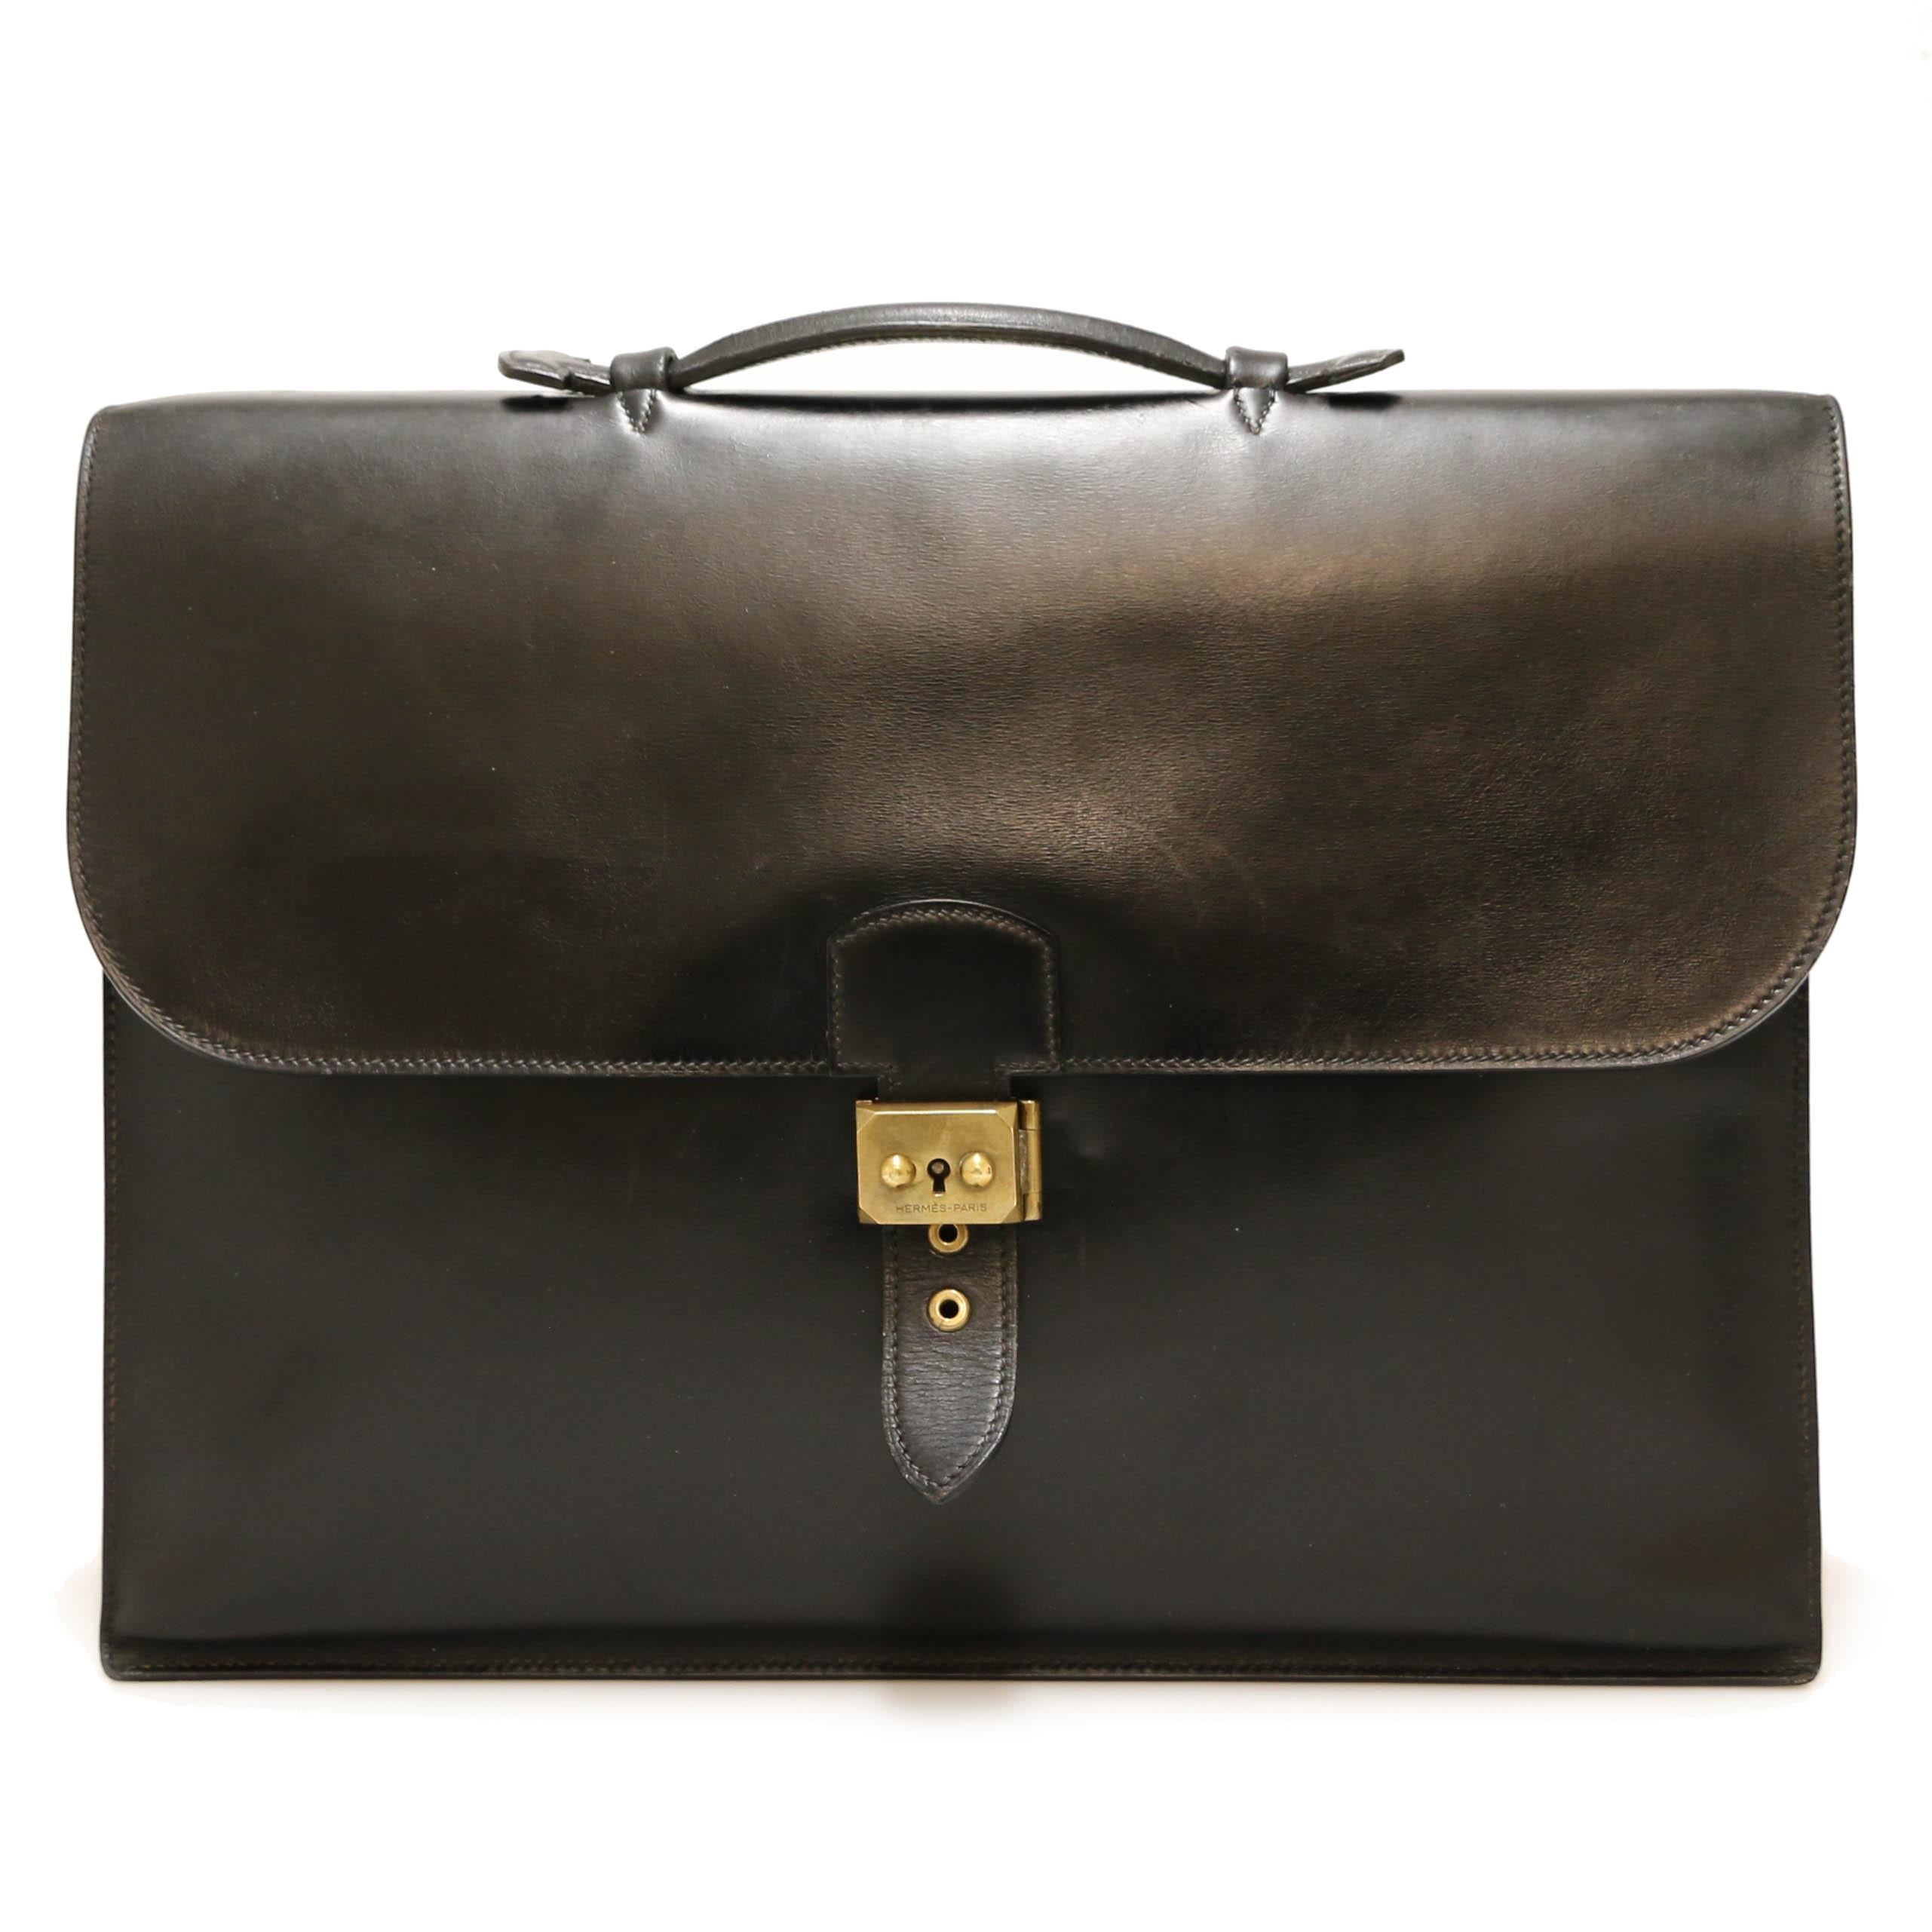 Beautiful vintage Hermès briefcase in black box leather.

Condition: very good
Made in France
Collection: briefcases
Genre: men
Material: smooth box leather
Interior: black smooth box leather and grey suede
Color: black
Dimensions: 40 x 30 x 10